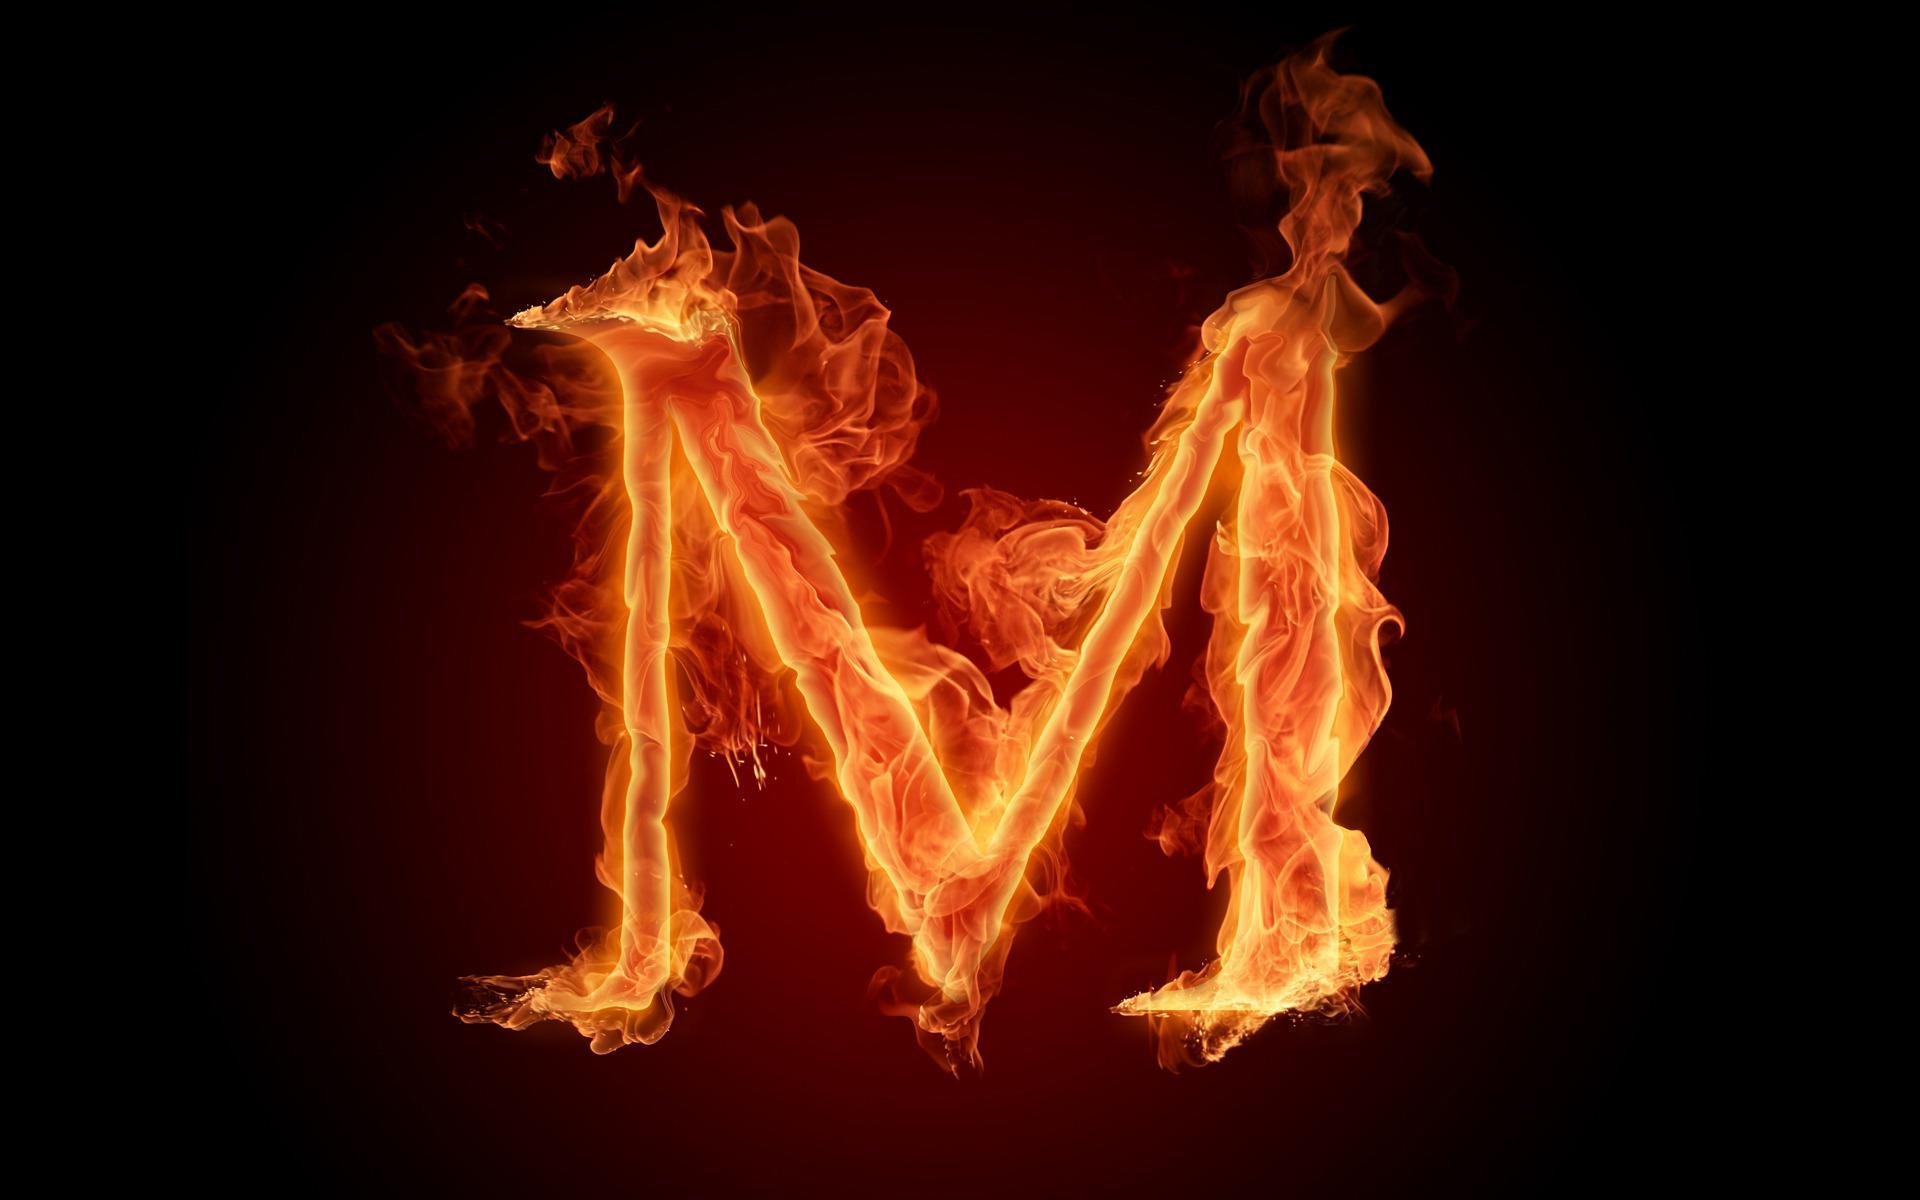 the fiery english alphabet picture m, 1920x1200 Wallpaper